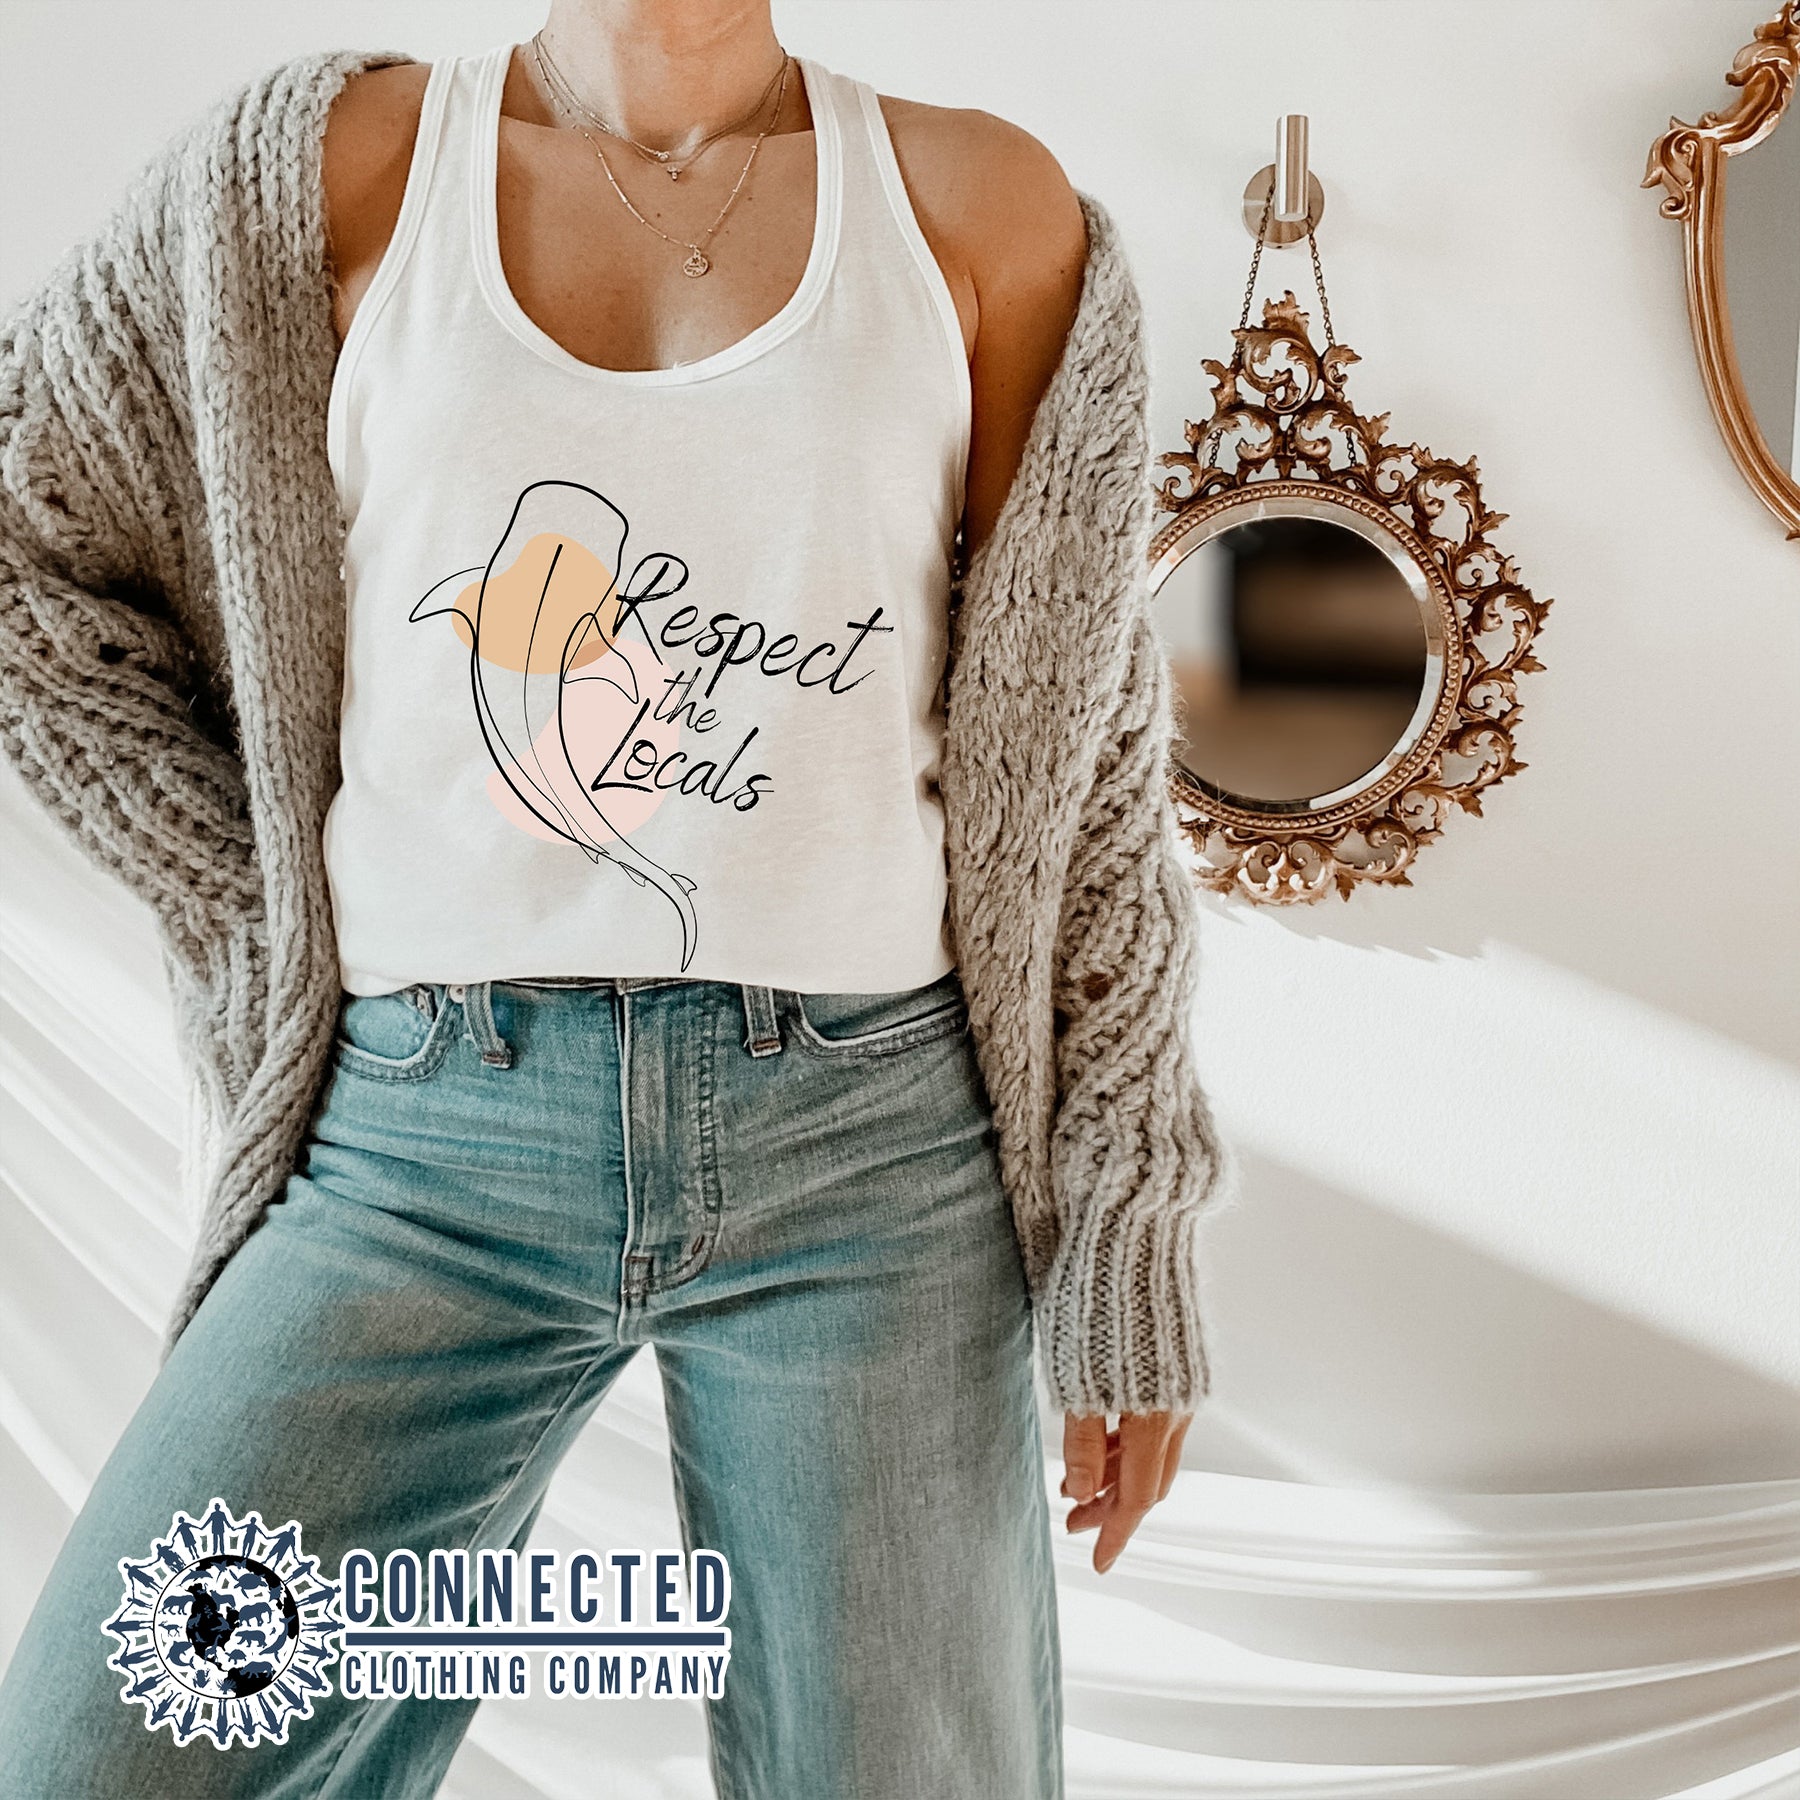 White Respect The Locals Whale Shark Tank Top - Connected Clothing Company - 10% of proceeds are donated to ocean conservation